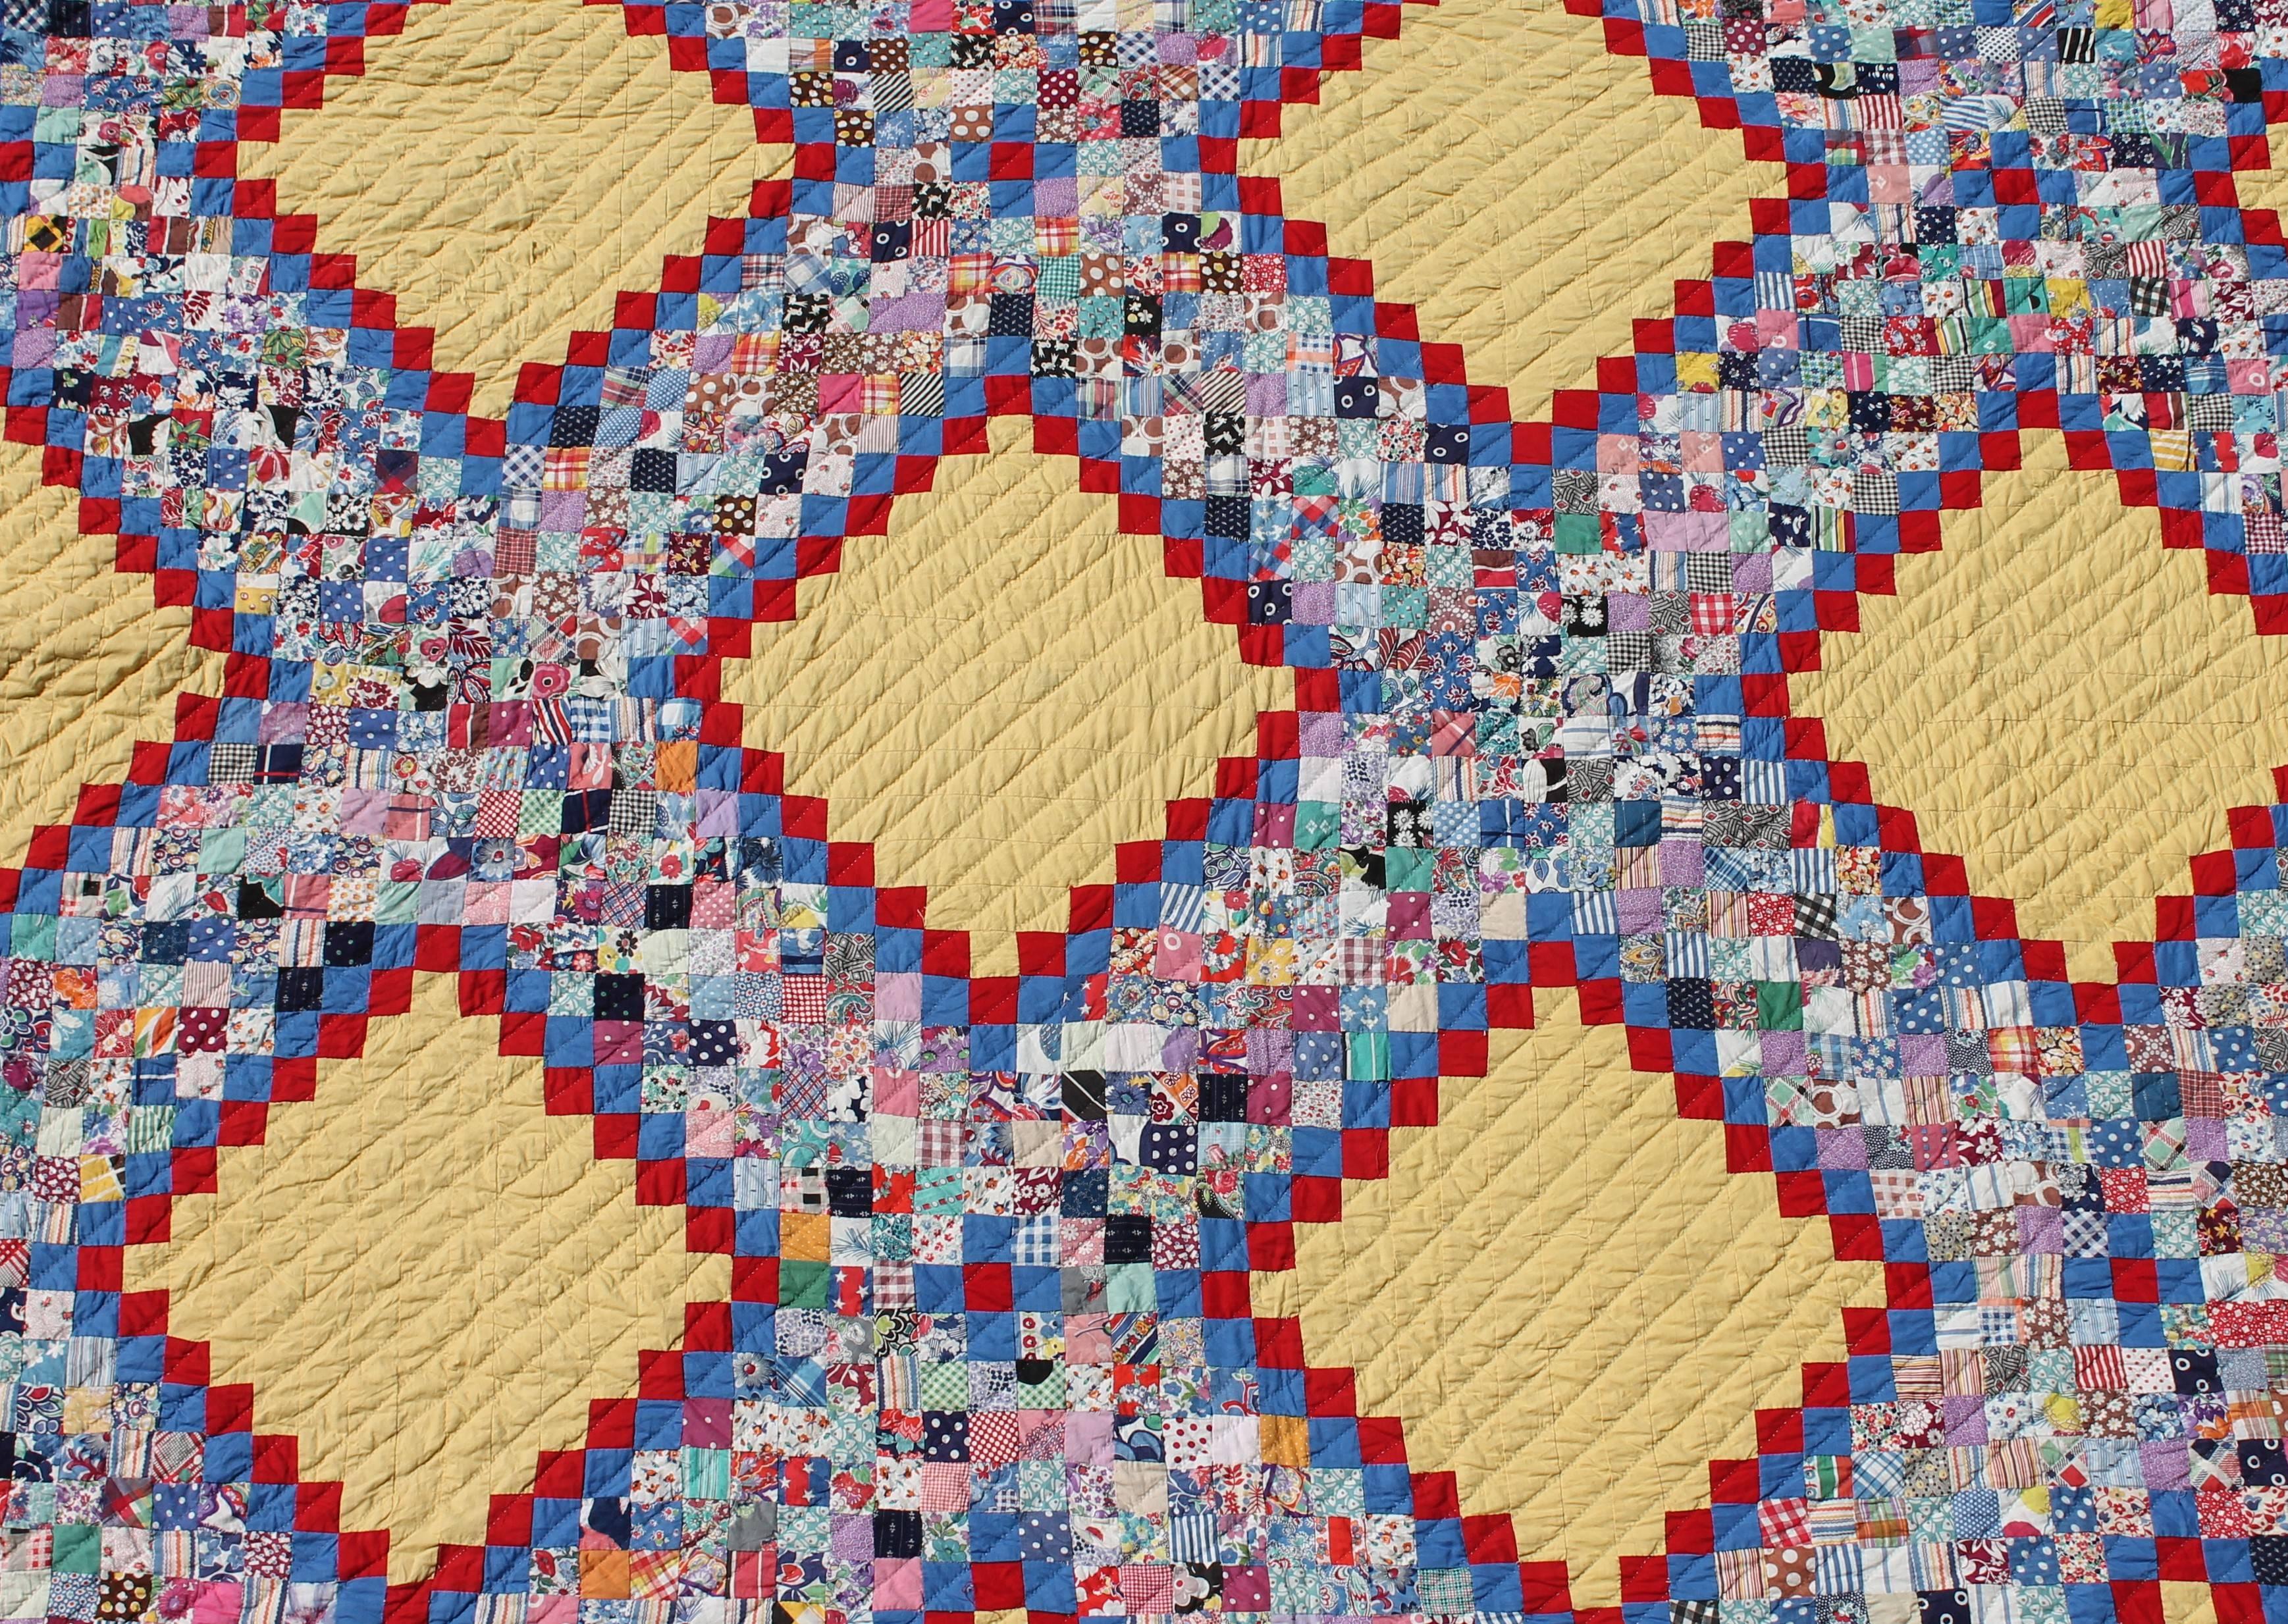 This fine postage stamp chain quilt is in great condition and fine piecework. The back round is a mellow yellow with a sky blue border.